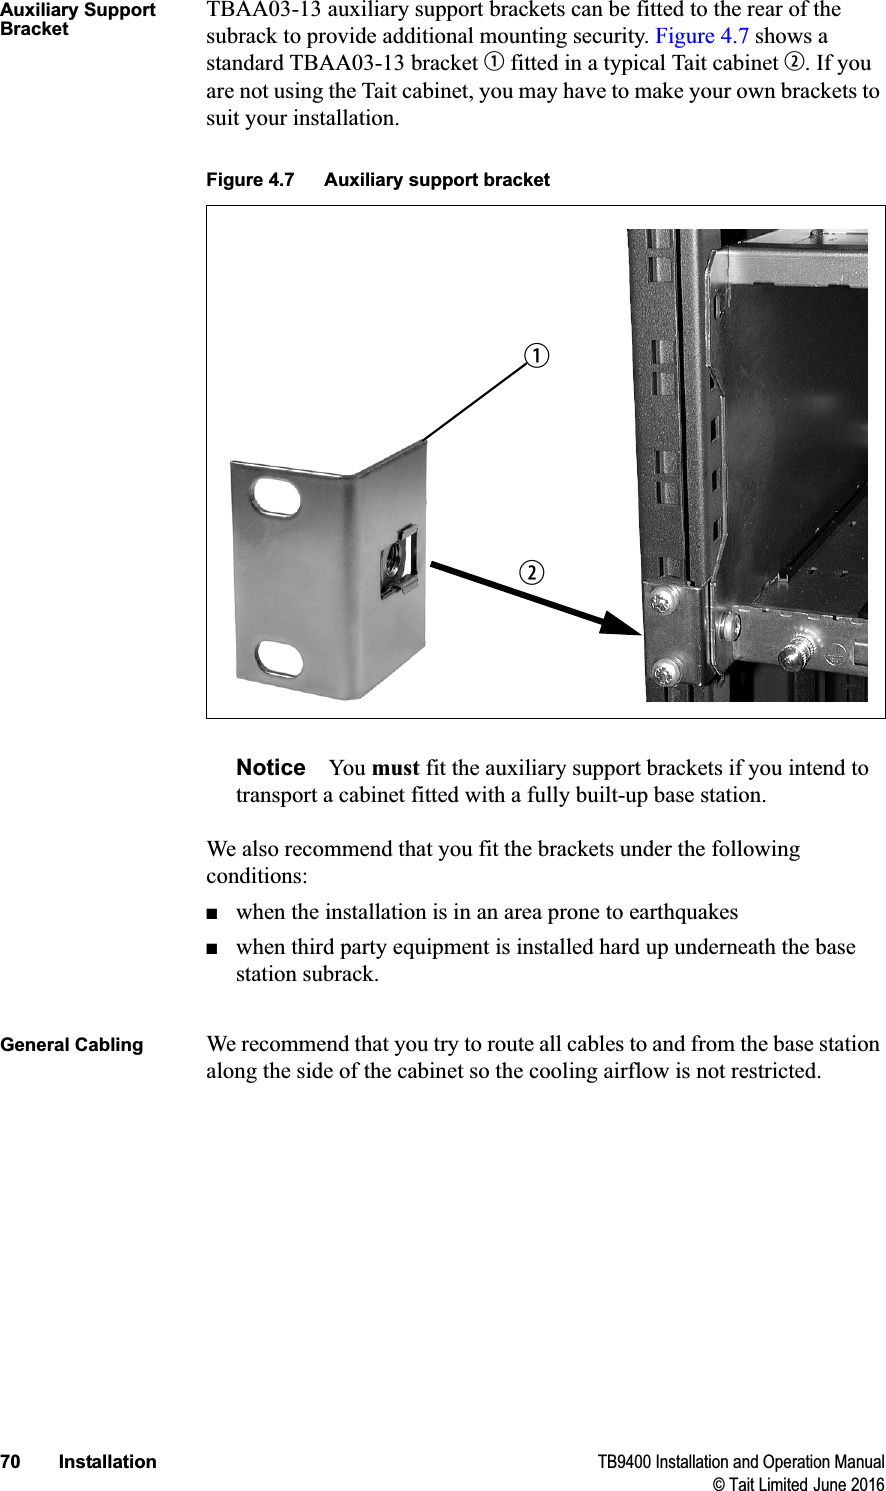 70 Installation TB9400 Installation and Operation Manual© Tait Limited June 2016Auxiliary Support BracketTBAA03-13 auxiliary support brackets can be fitted to the rear of the subrack to provide additional mounting security. Figure 4.7 shows a standard TBAA03-13 bracket b fitted in a typical Tait cabinet c. If you are not using the Tait cabinet, you may have to make your own brackets to suit your installation.Notice You must fit the auxiliary support brackets if you intend to transport a cabinet fitted with a fully built-up base station.We also recommend that you fit the brackets under the following conditions:■when the installation is in an area prone to earthquakes■when third party equipment is installed hard up underneath the base station subrack.General Cabling We recommend that you try to route all cables to and from the base station along the side of the cabinet so the cooling airflow is not restricted.Figure 4.7 Auxiliary support bracketcb